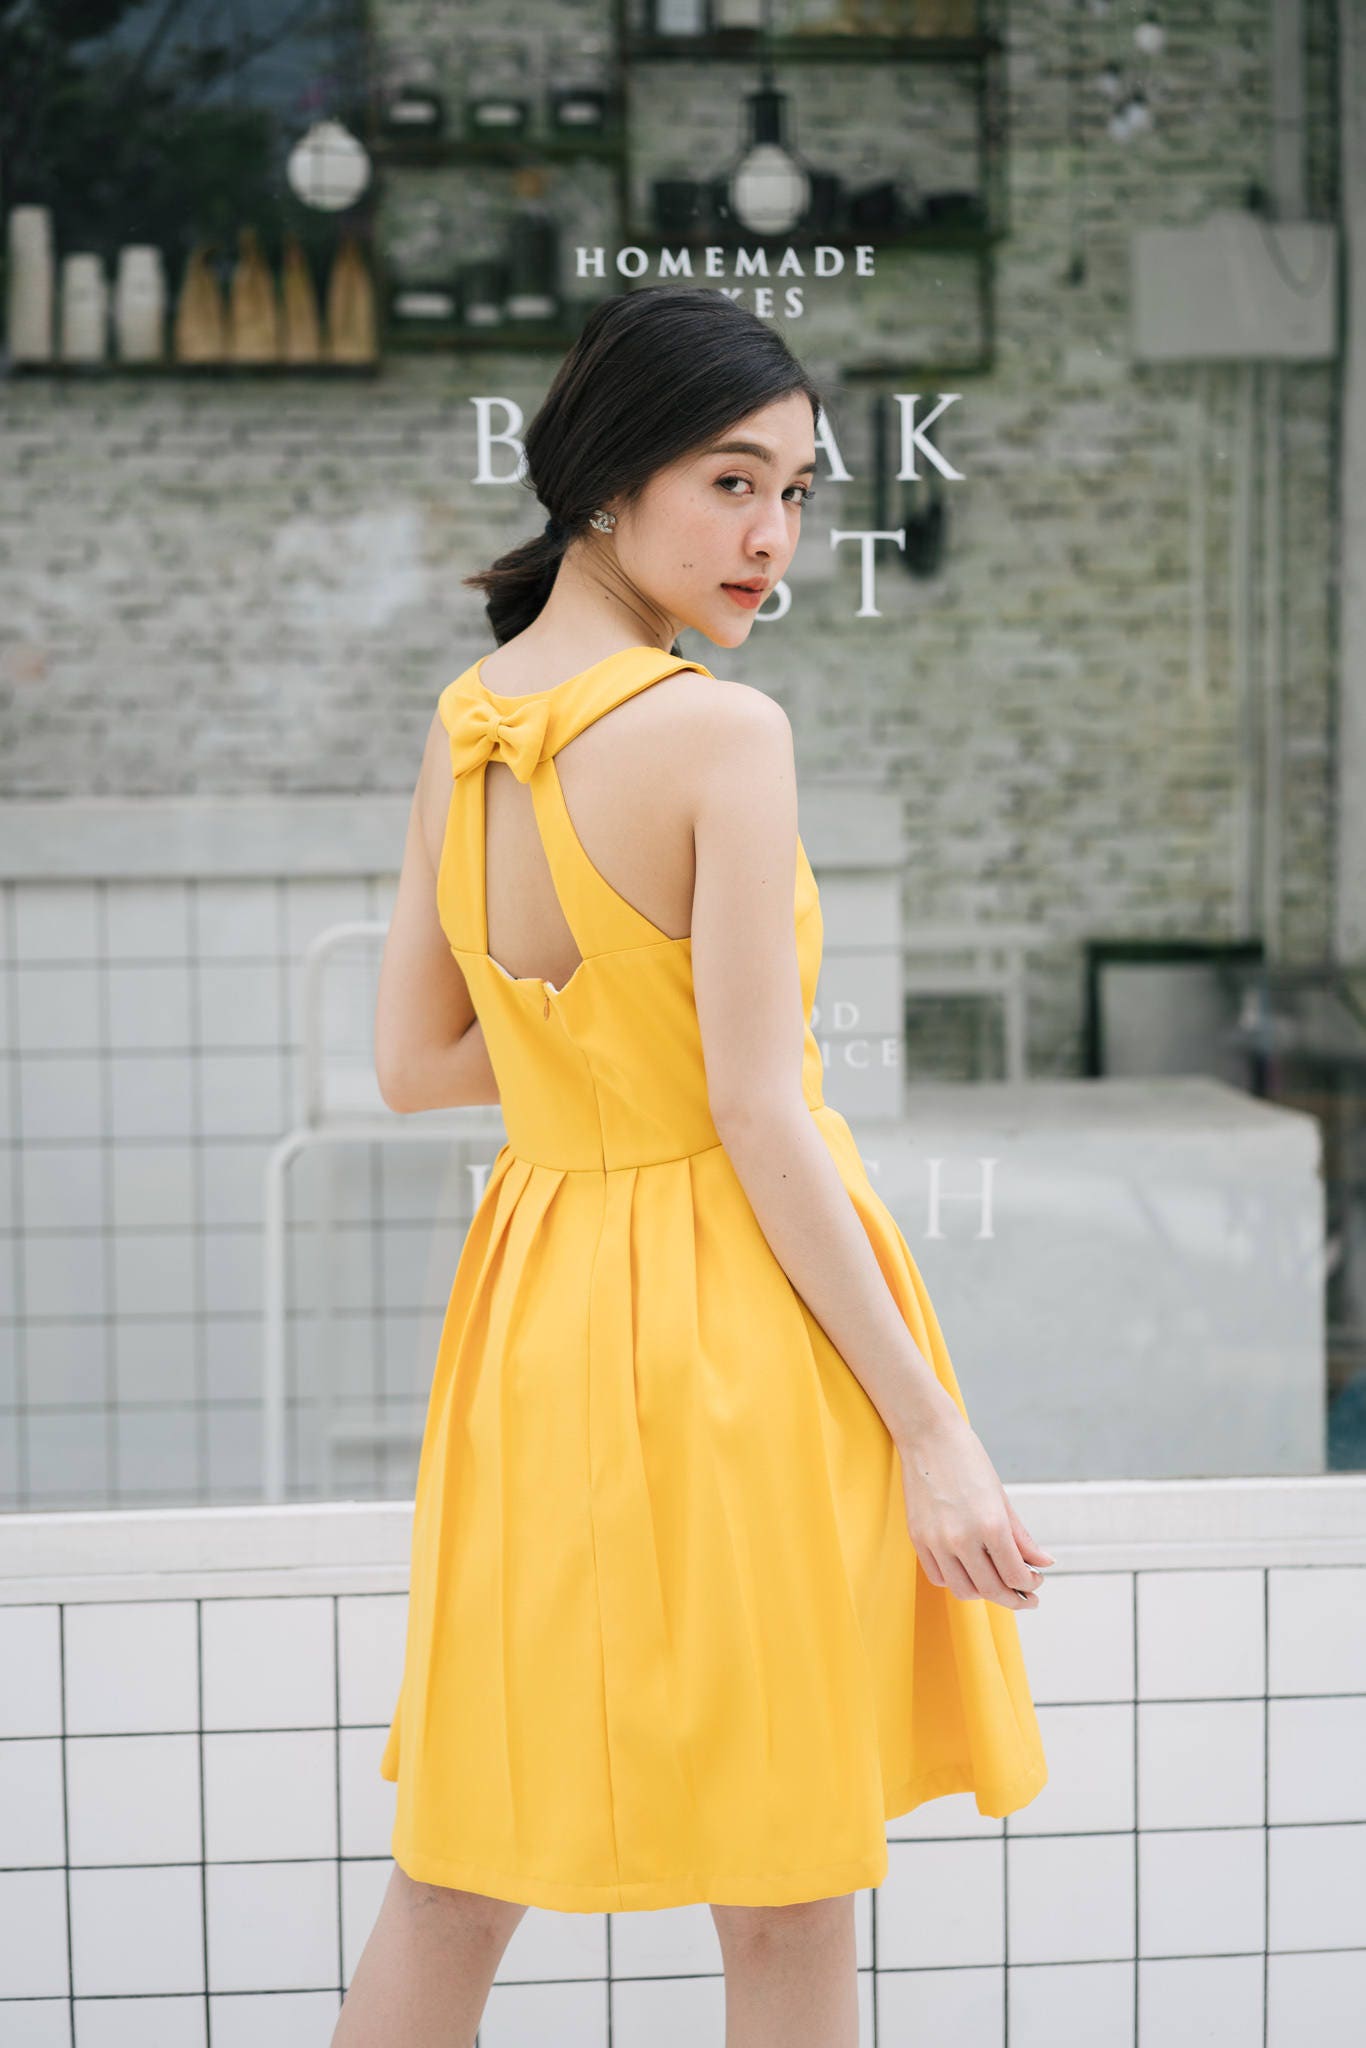 Mustard Yellow Dress School Dance Back Bow Cute Bridesmaid Gown Summer Vintage Sundress Retro Party Love Potion